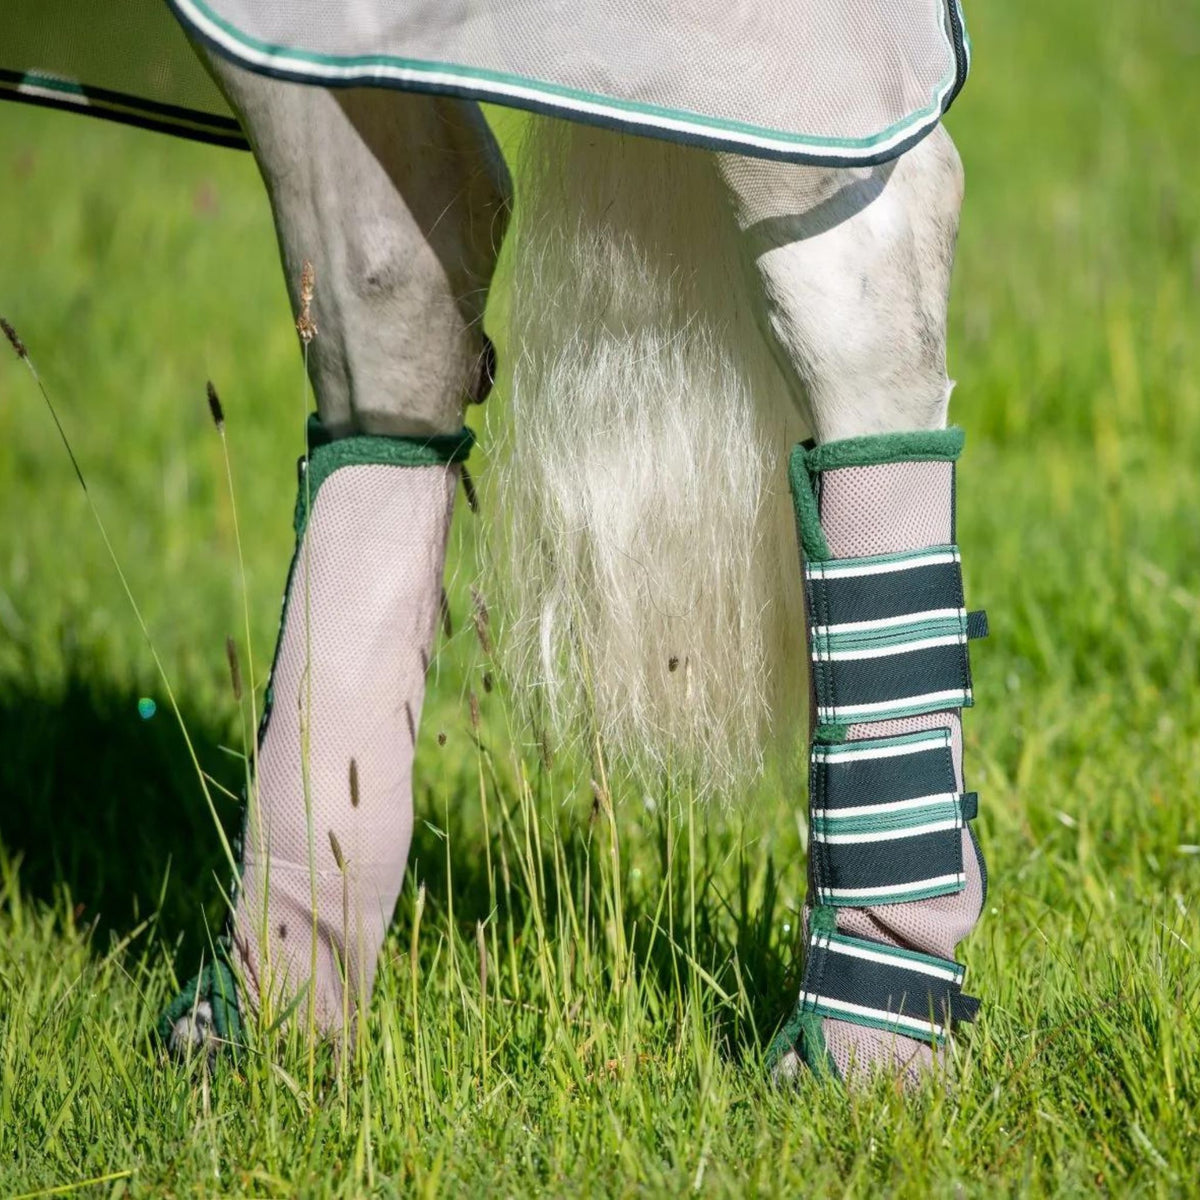 Horse with white and green airmesh boots on.